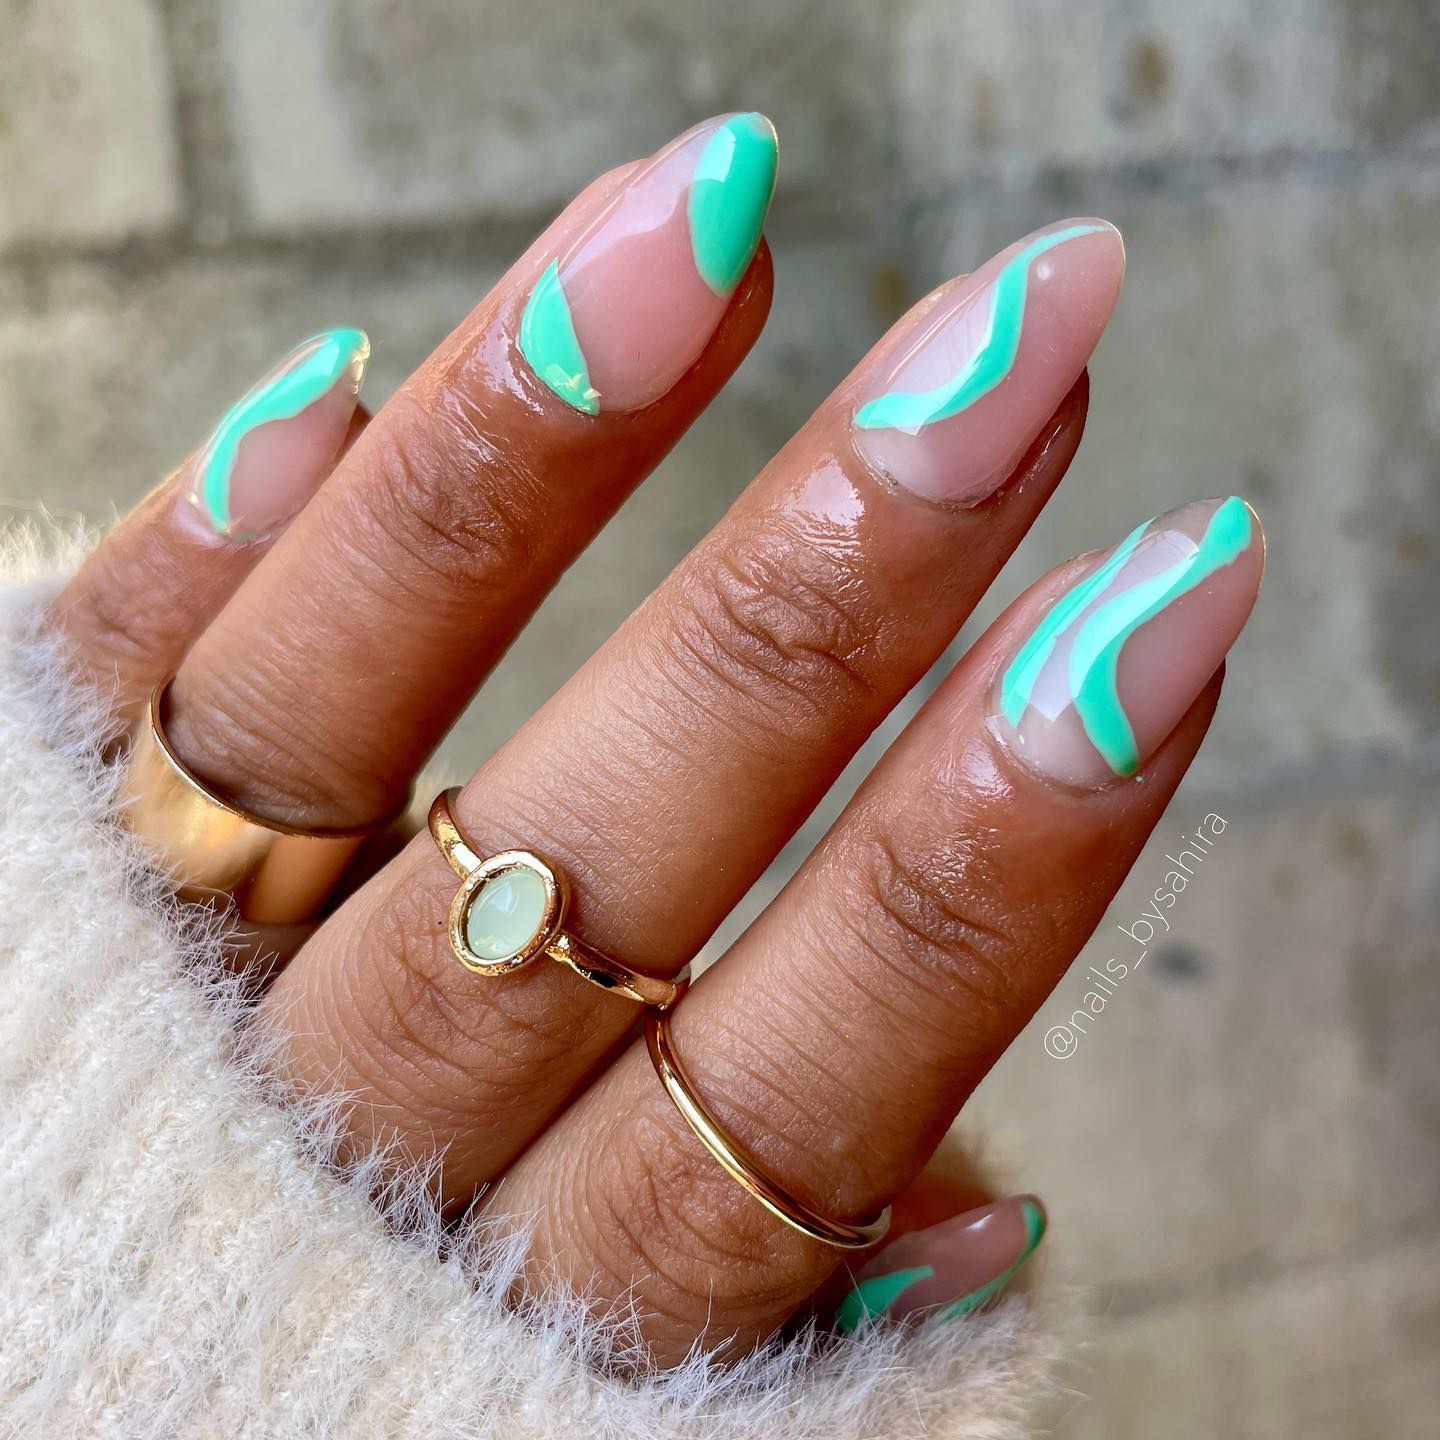 Mint almond nails such as these will look cute and are such a feminine summer mani.